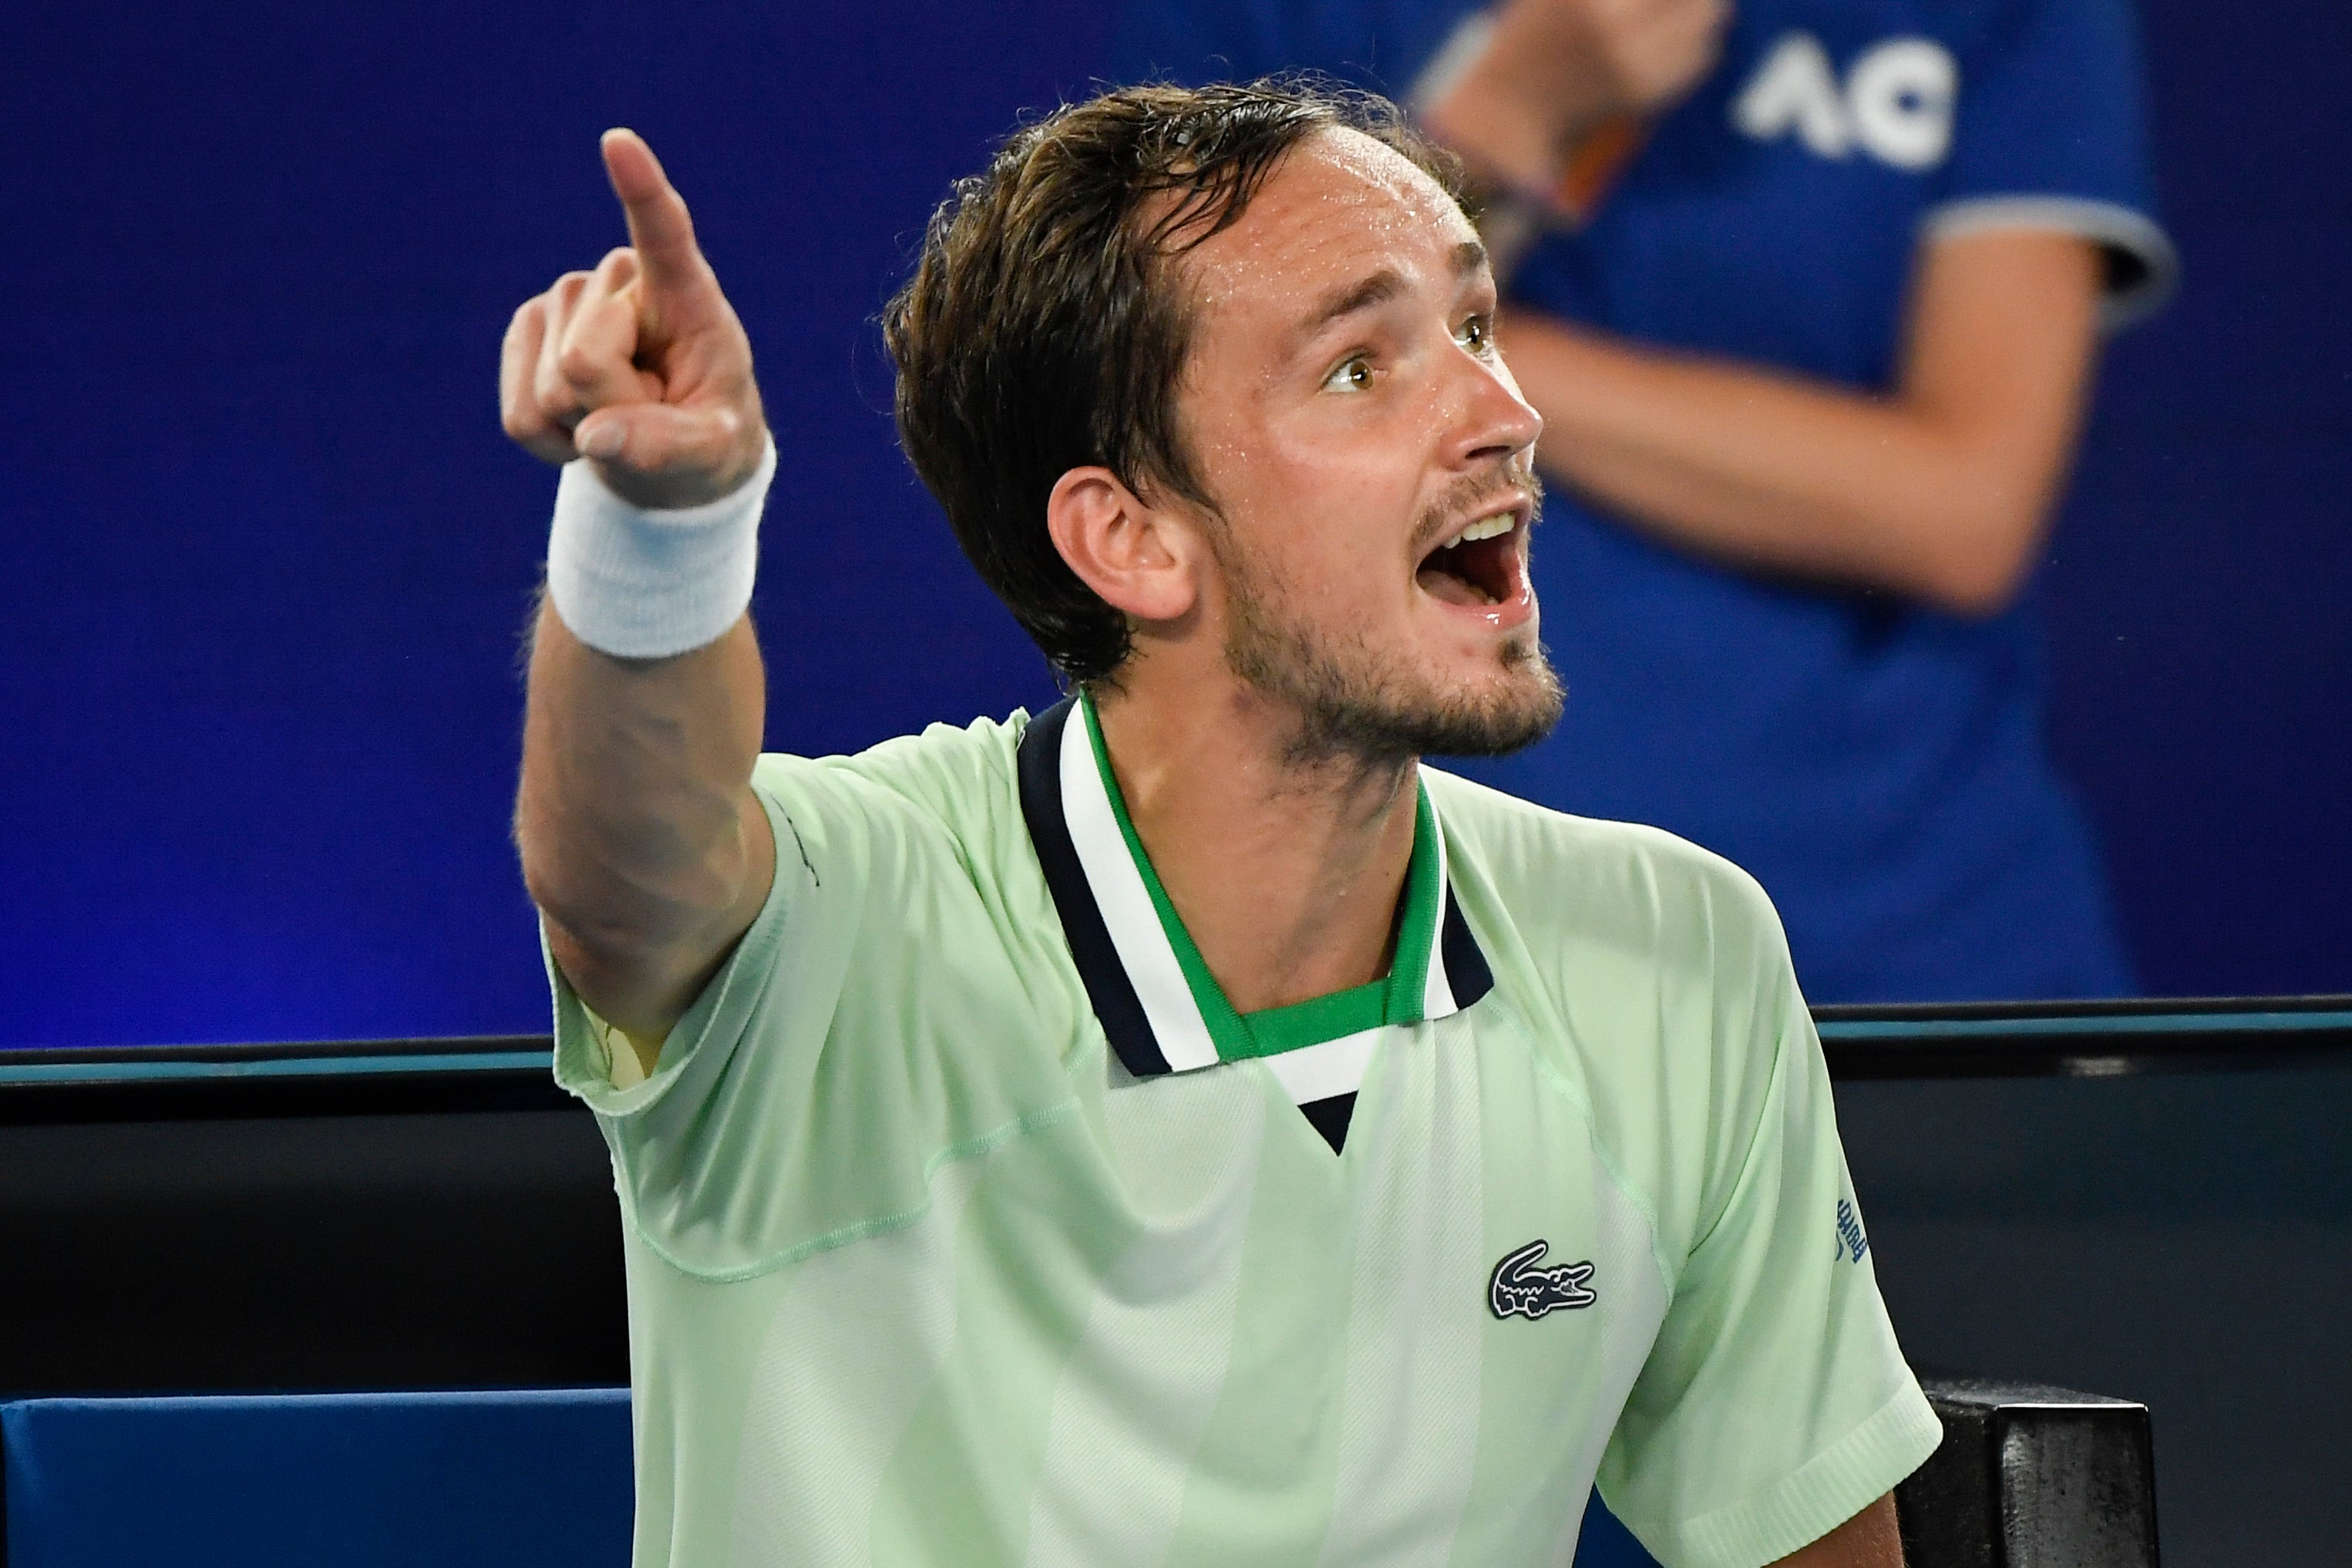 Daniil Medvedev lost his cool with umpire Jaume Campistol